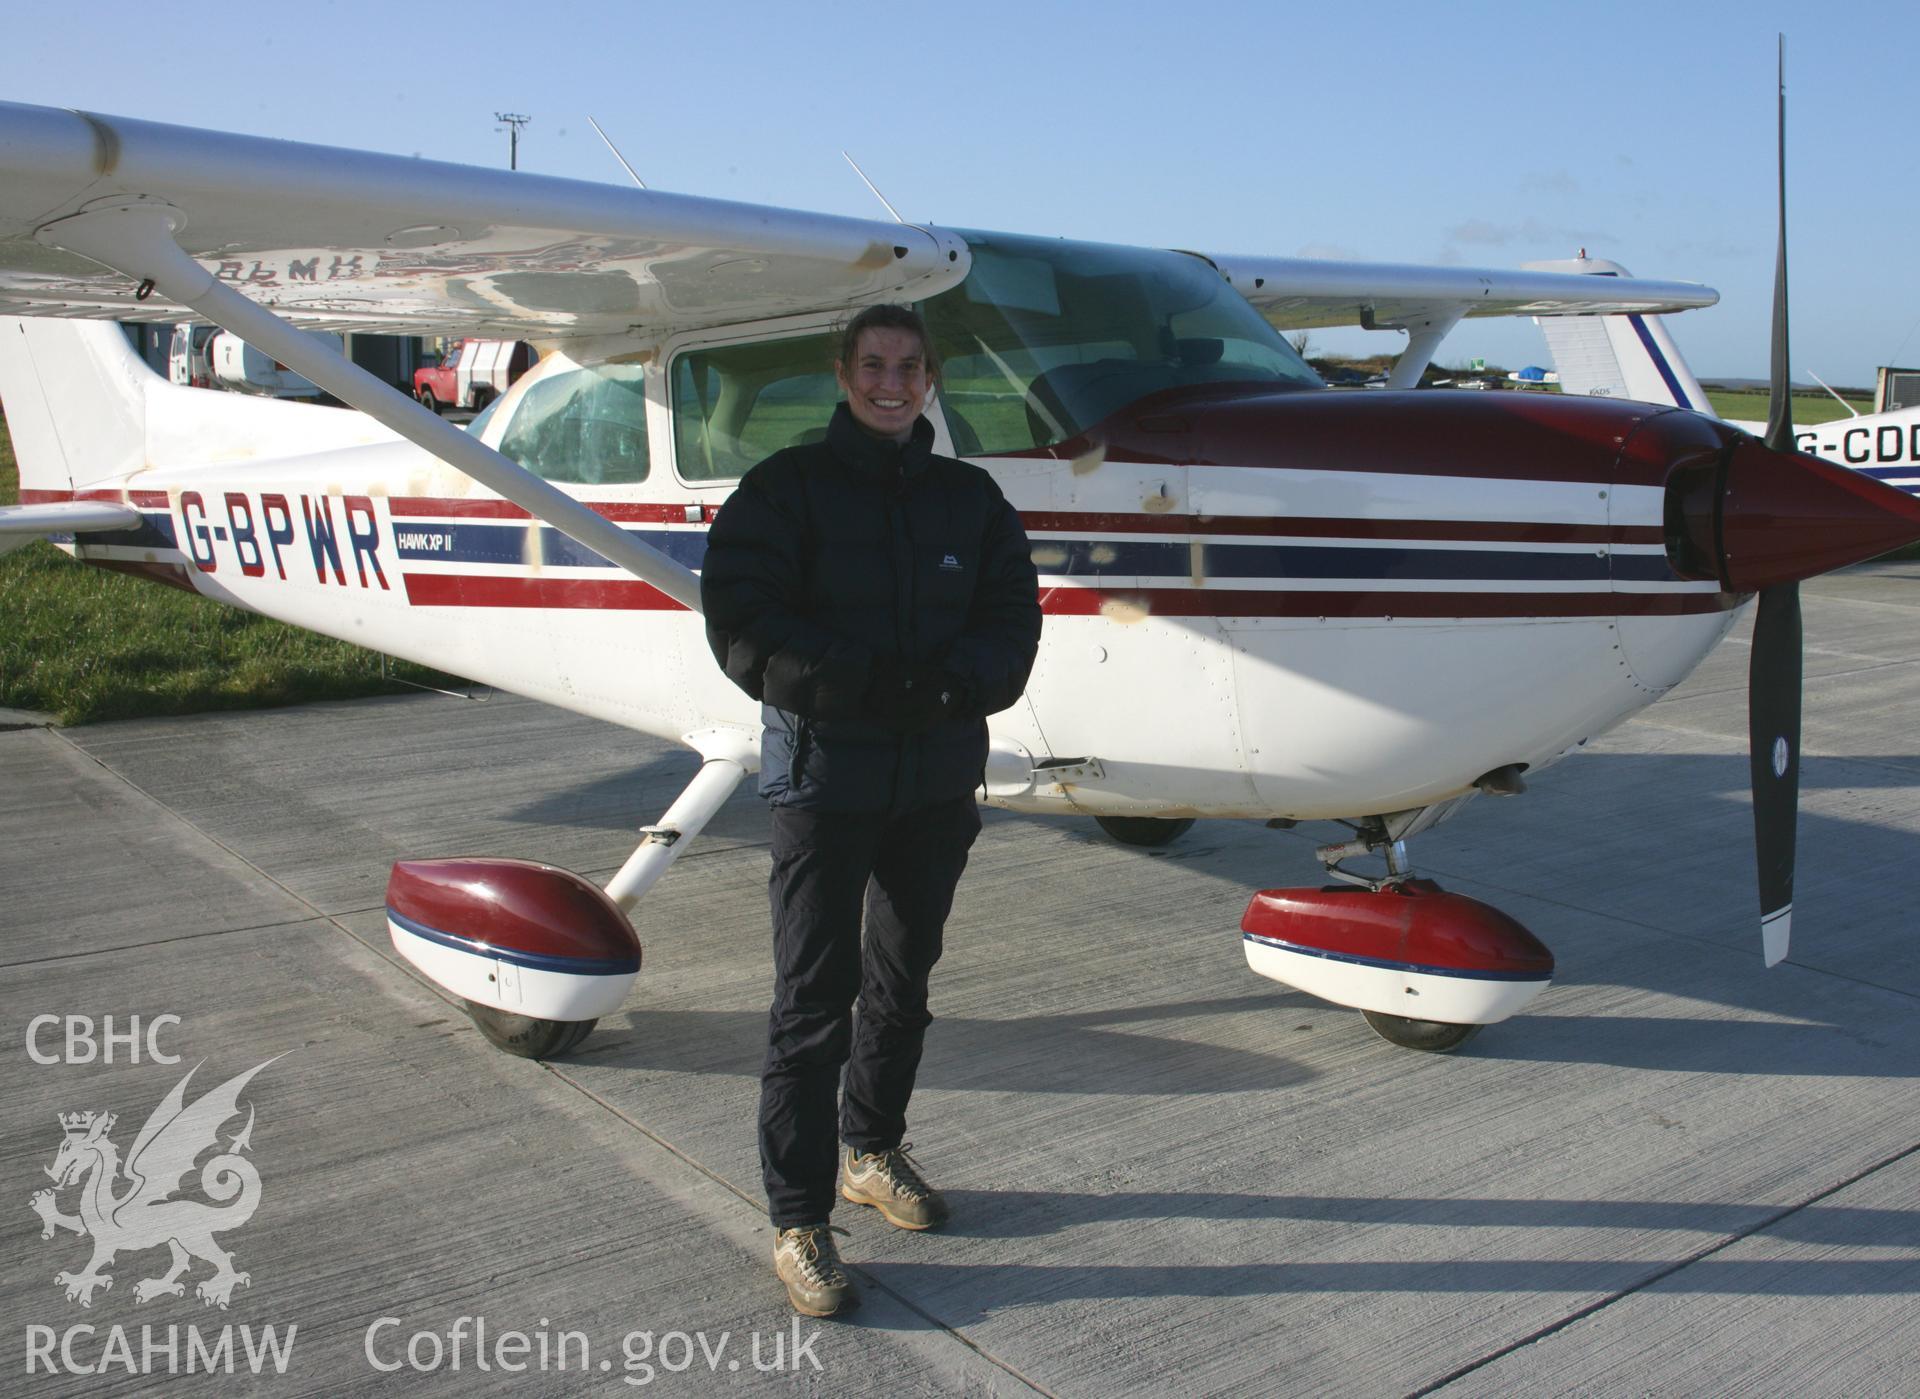 RCAHMW colour photograph of Louise Barker and Cessna 172 post-flight at Haverfordwest Airfield (Withybush). Taken on 11 January 2006 by Toby Driver.